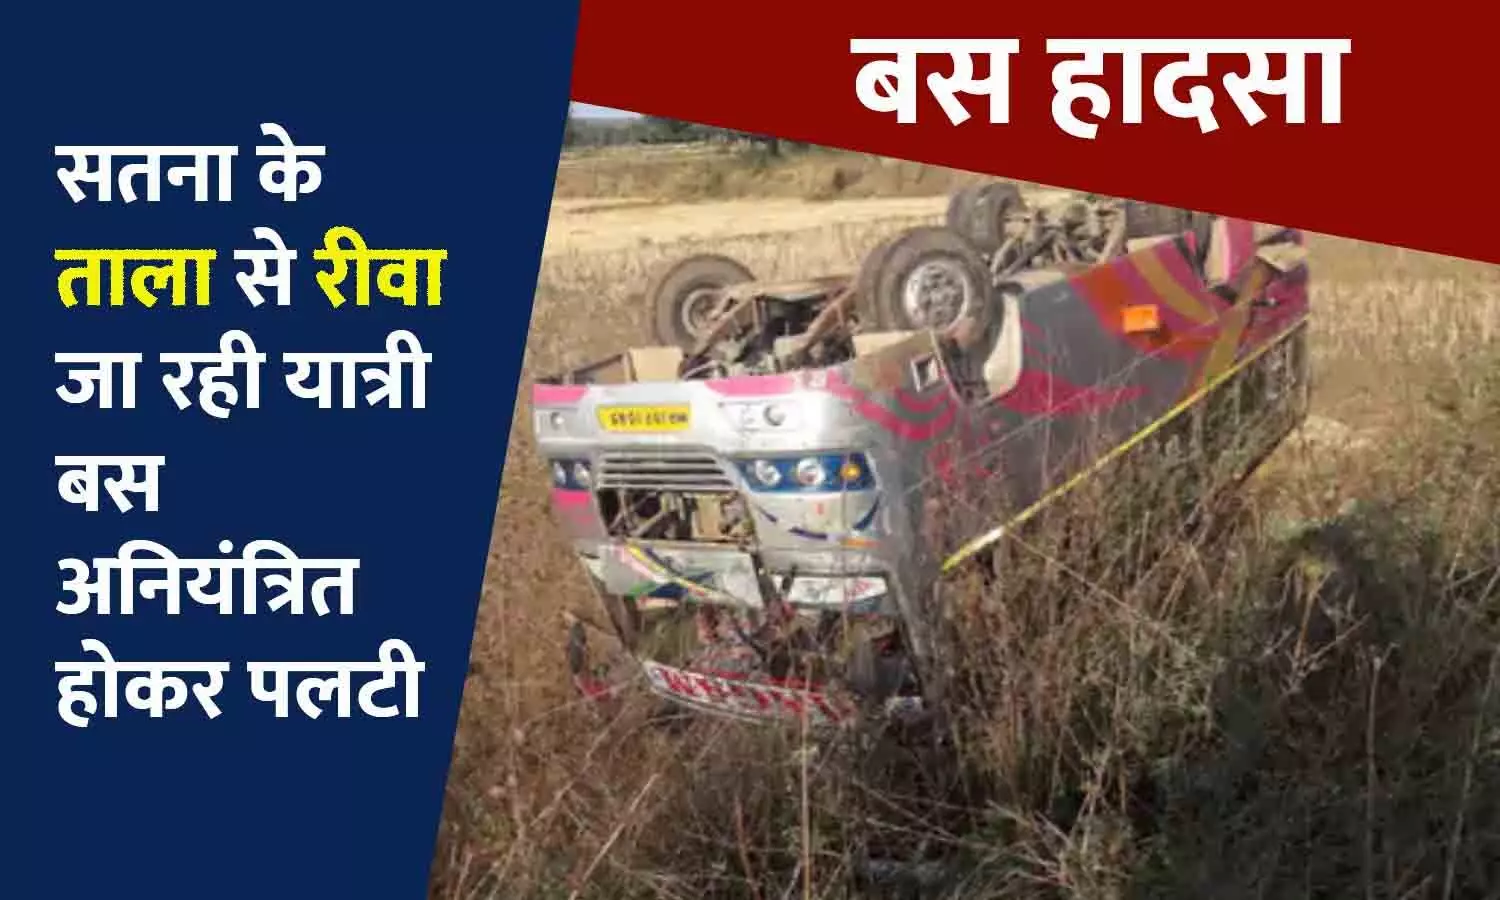 Passenger bus going from Tala to Rewa uncontrolled overturned